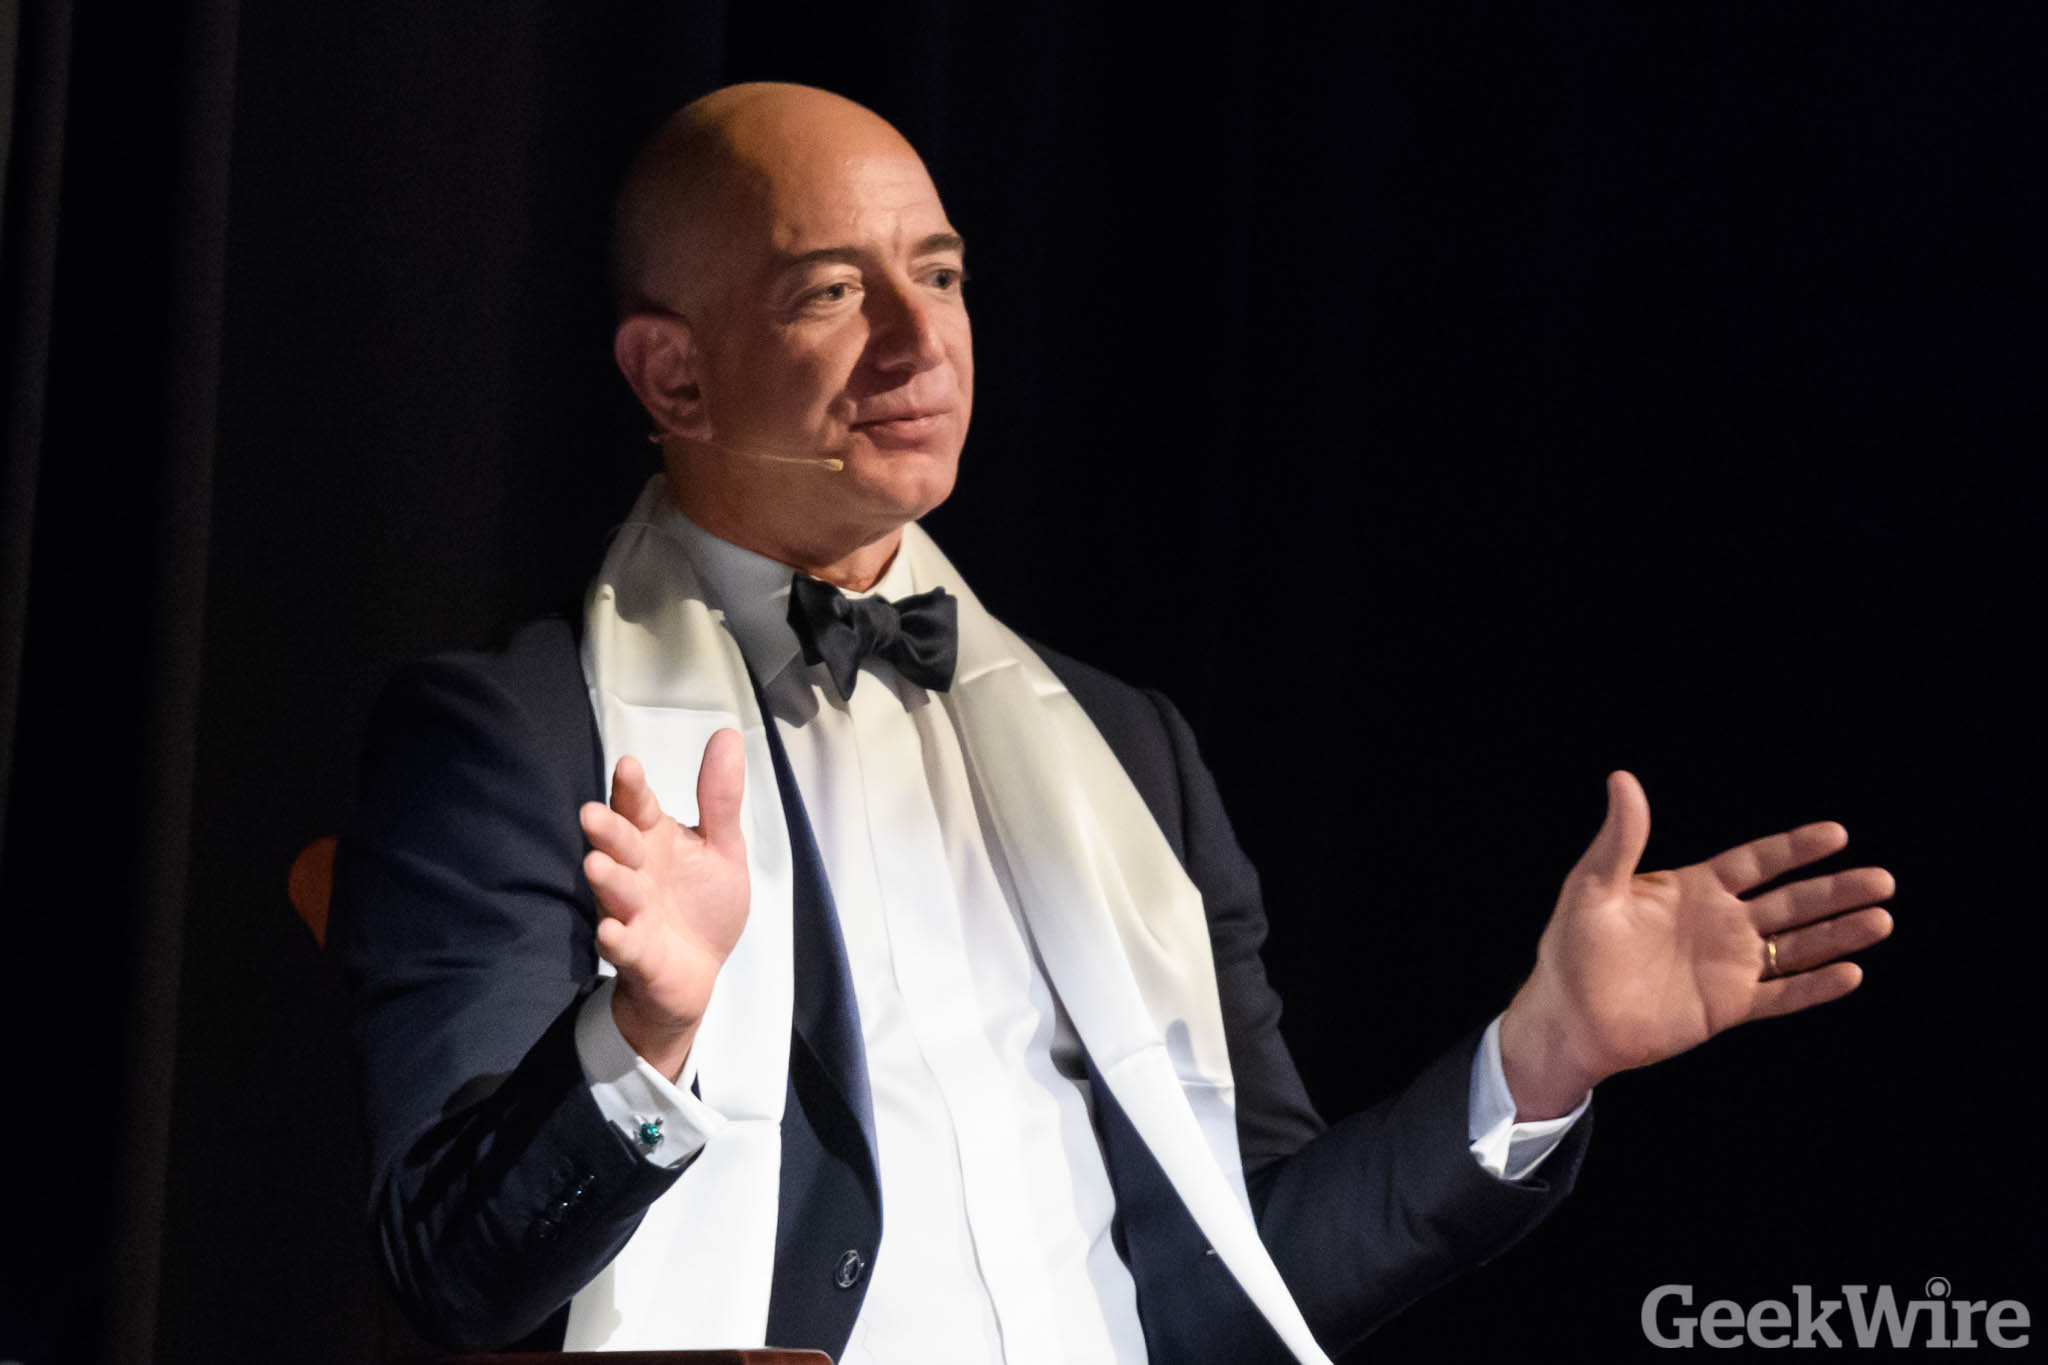 Jeff Bezos will reportedly join the billionaire boating class with a $500M luxury sailing superyacht